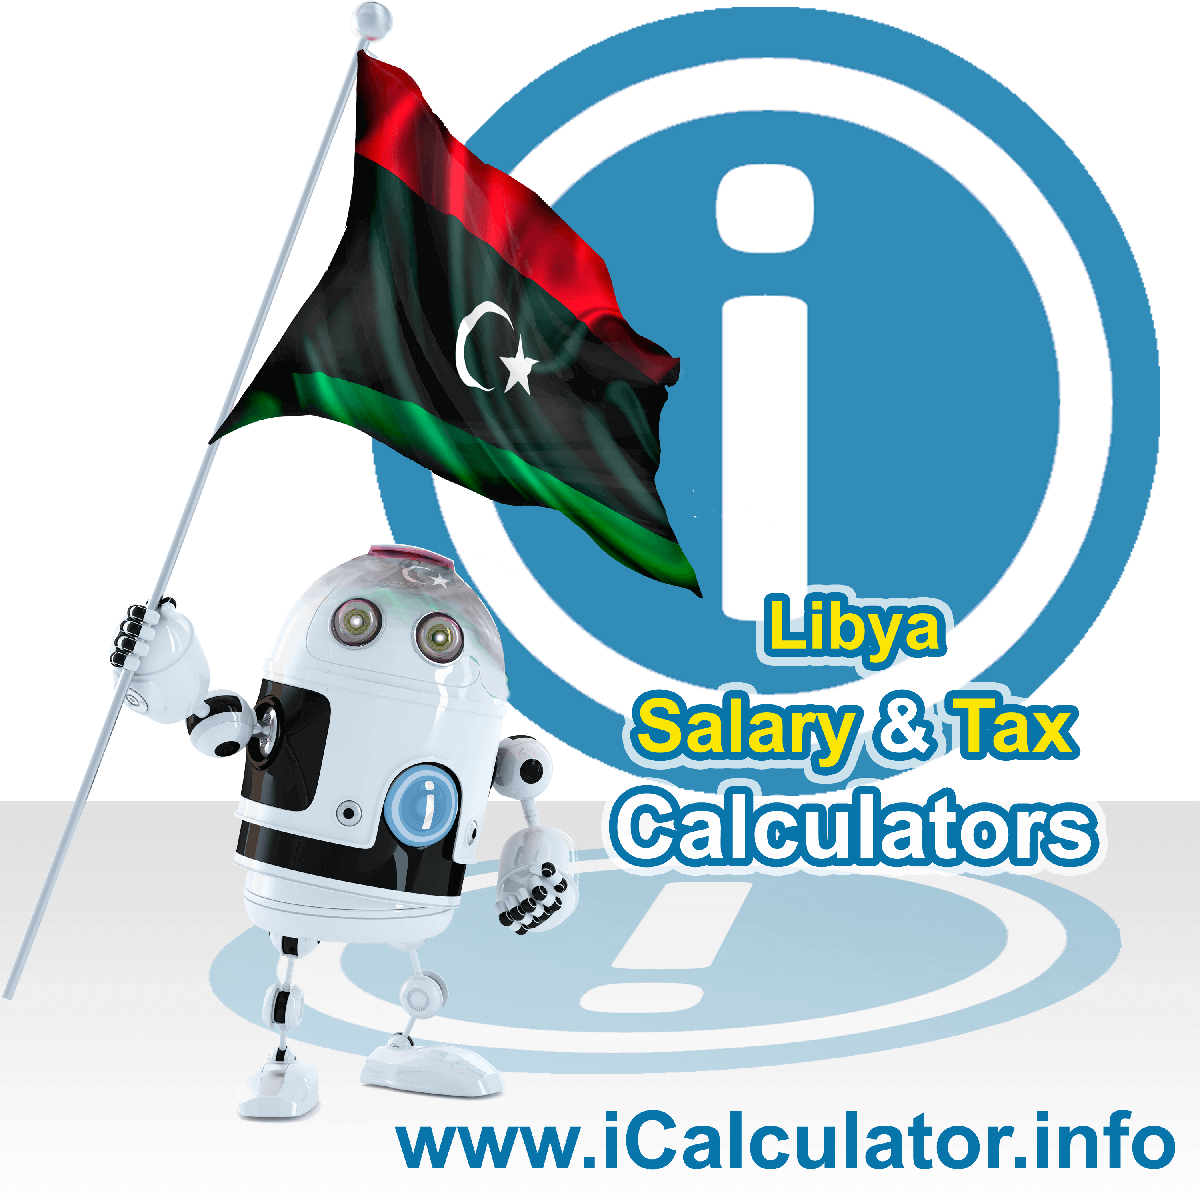 Libya Salary Calculator. This image shows the Libyaese flag and information relating to the tax formula for the Libya Tax Calculator